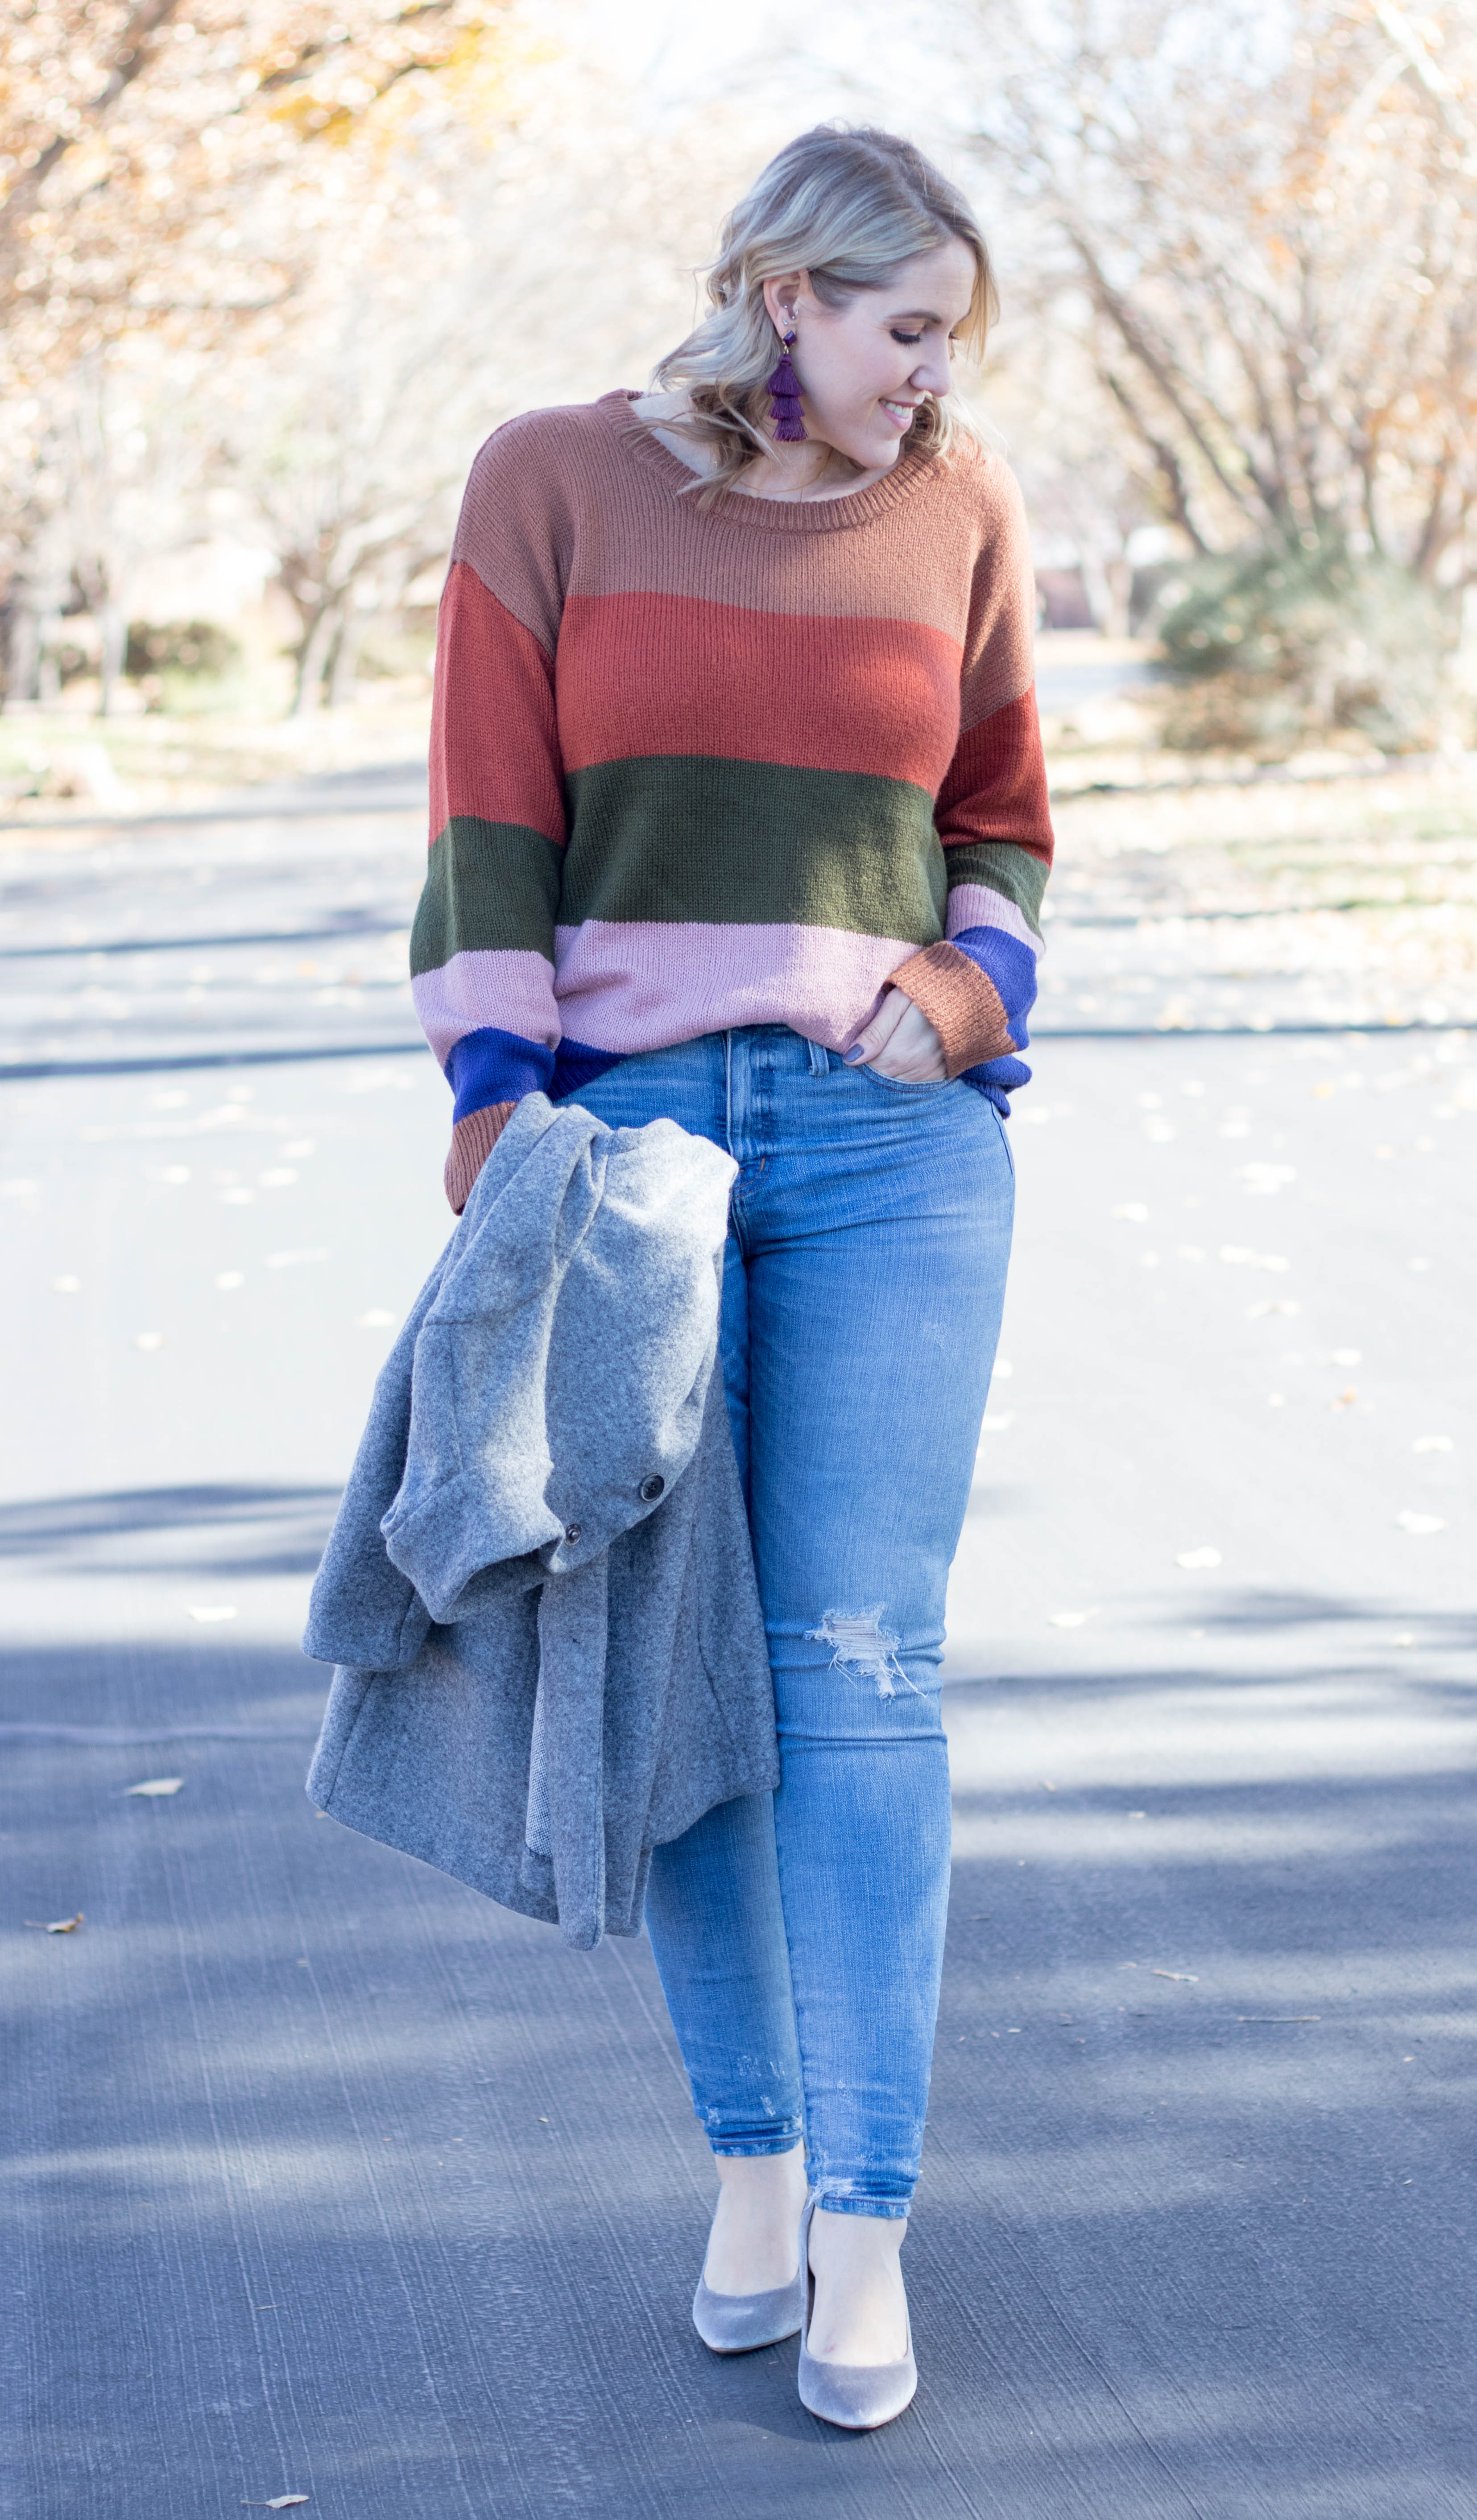 how to style a striped sweater for winter #winterfashion #tallfashion #madewell